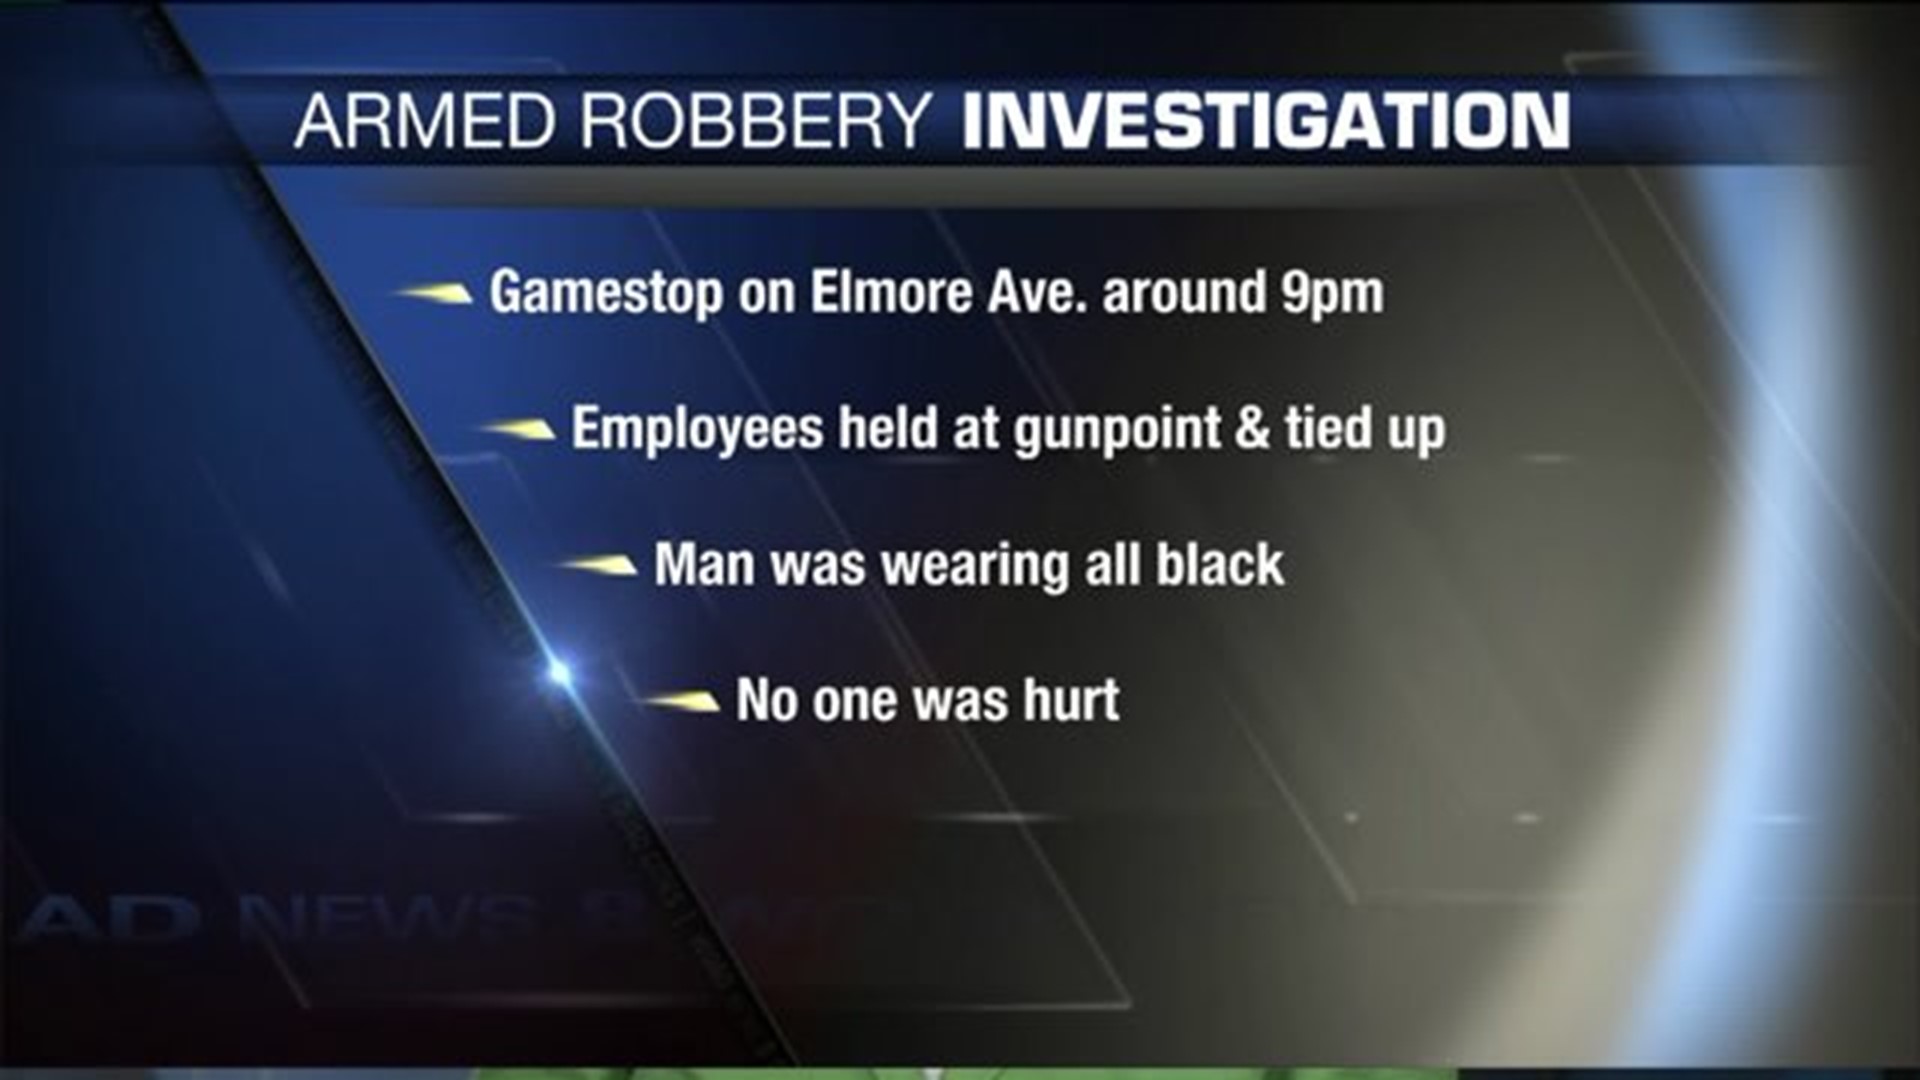 Armed robbery investigation